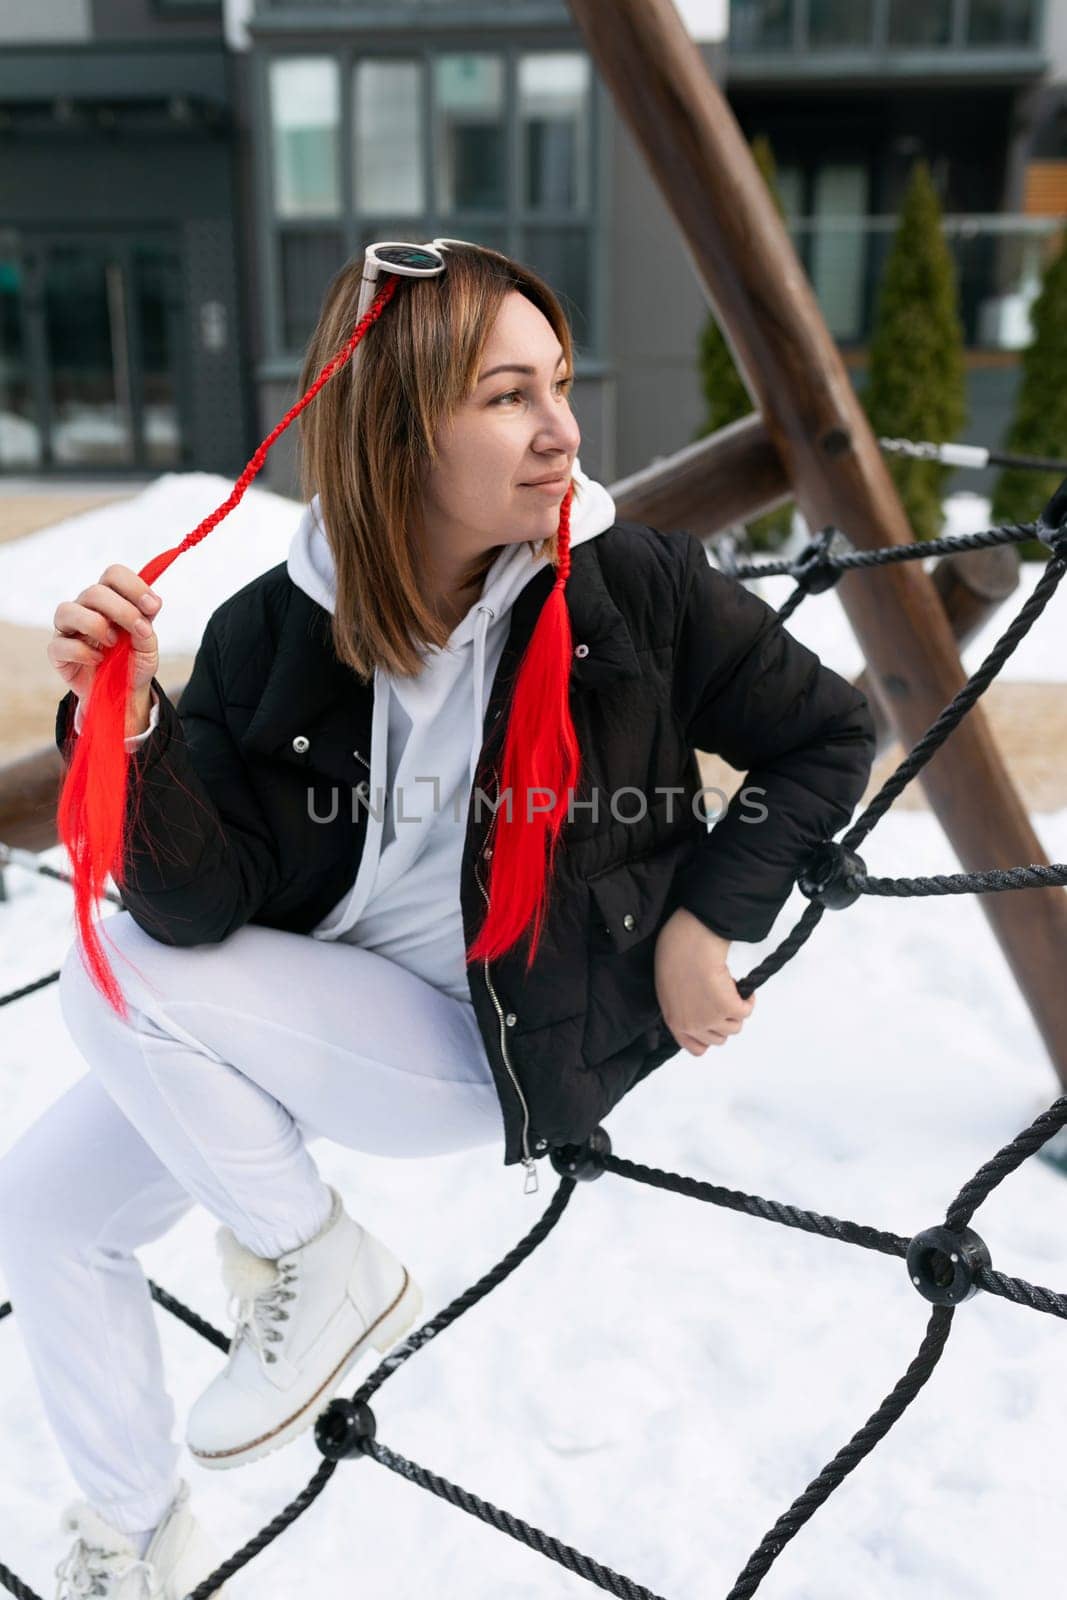 European woman in winter clothes walking on the playground by TRMK